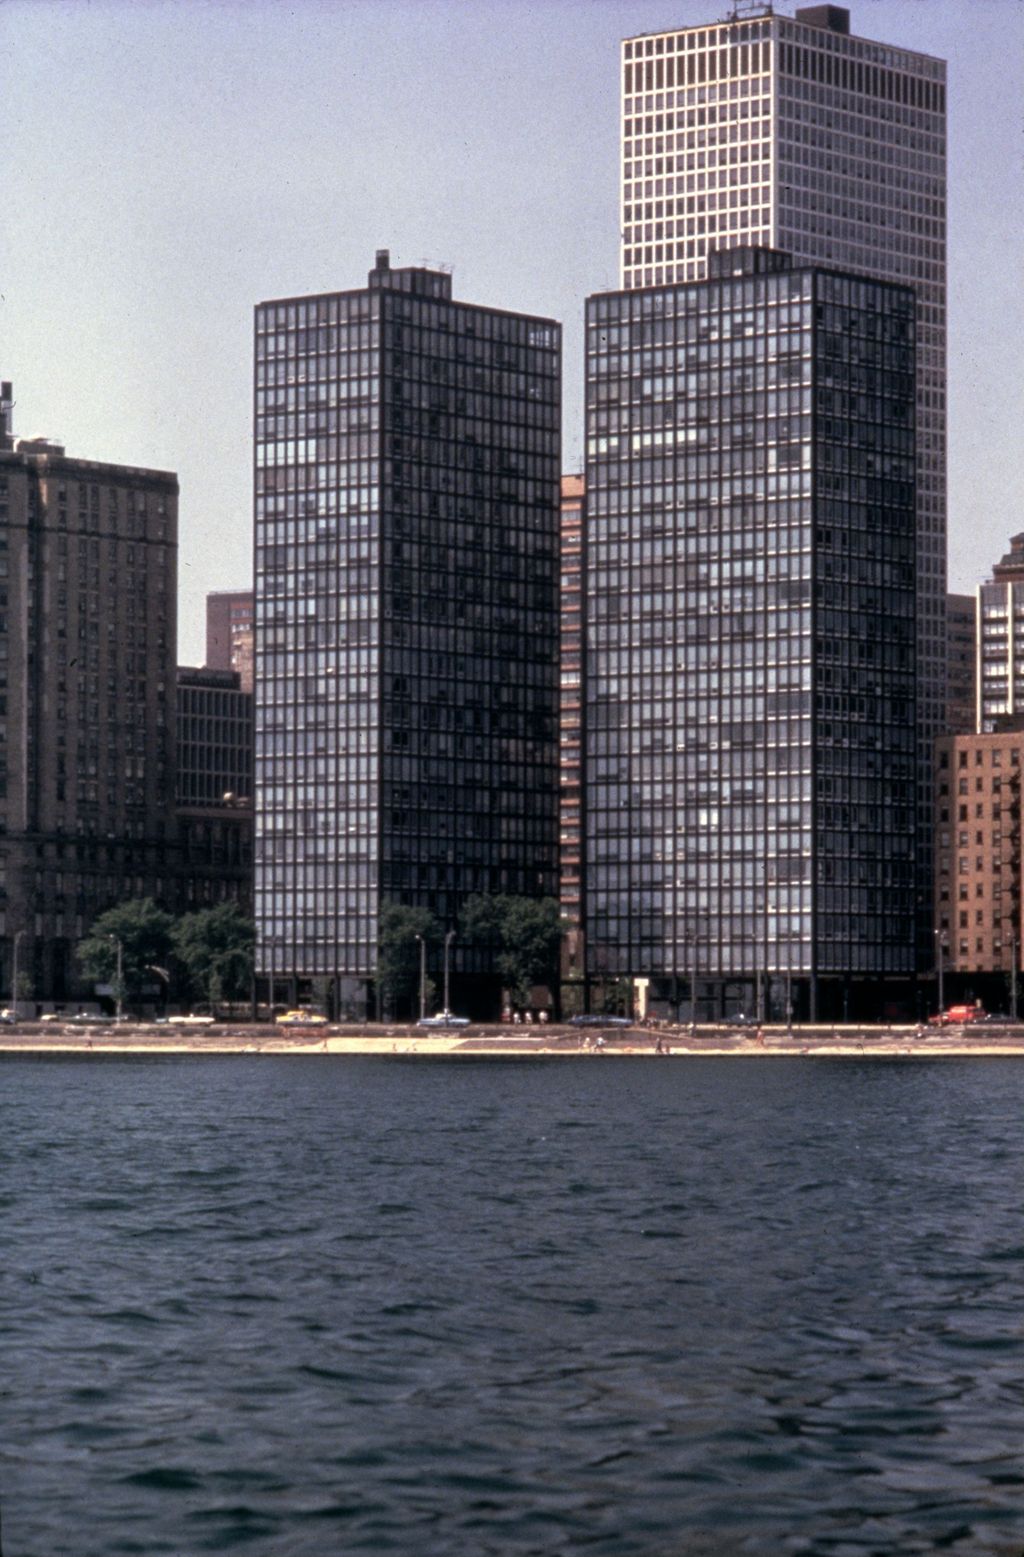 Miniature of 860-880 N. Lake Shore Drive apartments from the lake